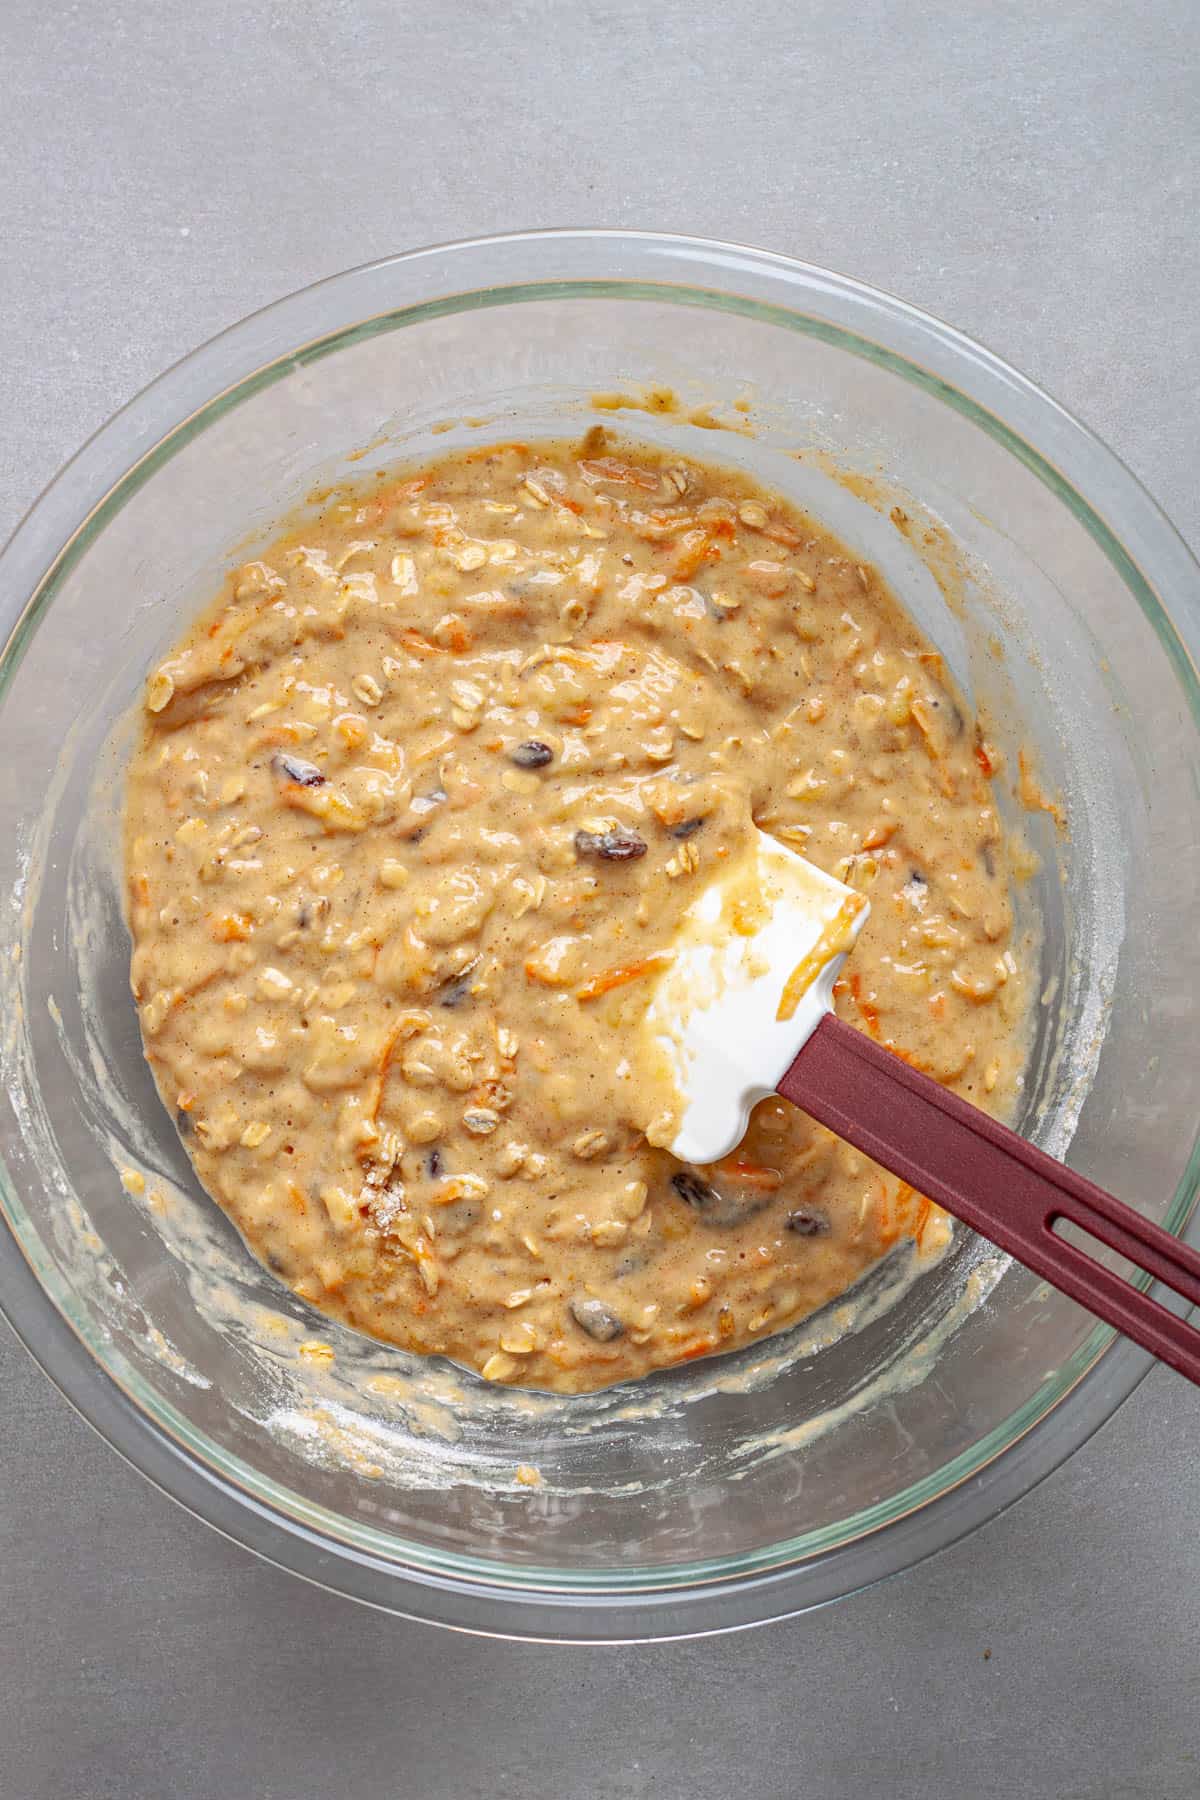 Carrot banana muffin batter mixed together in a large bowl.